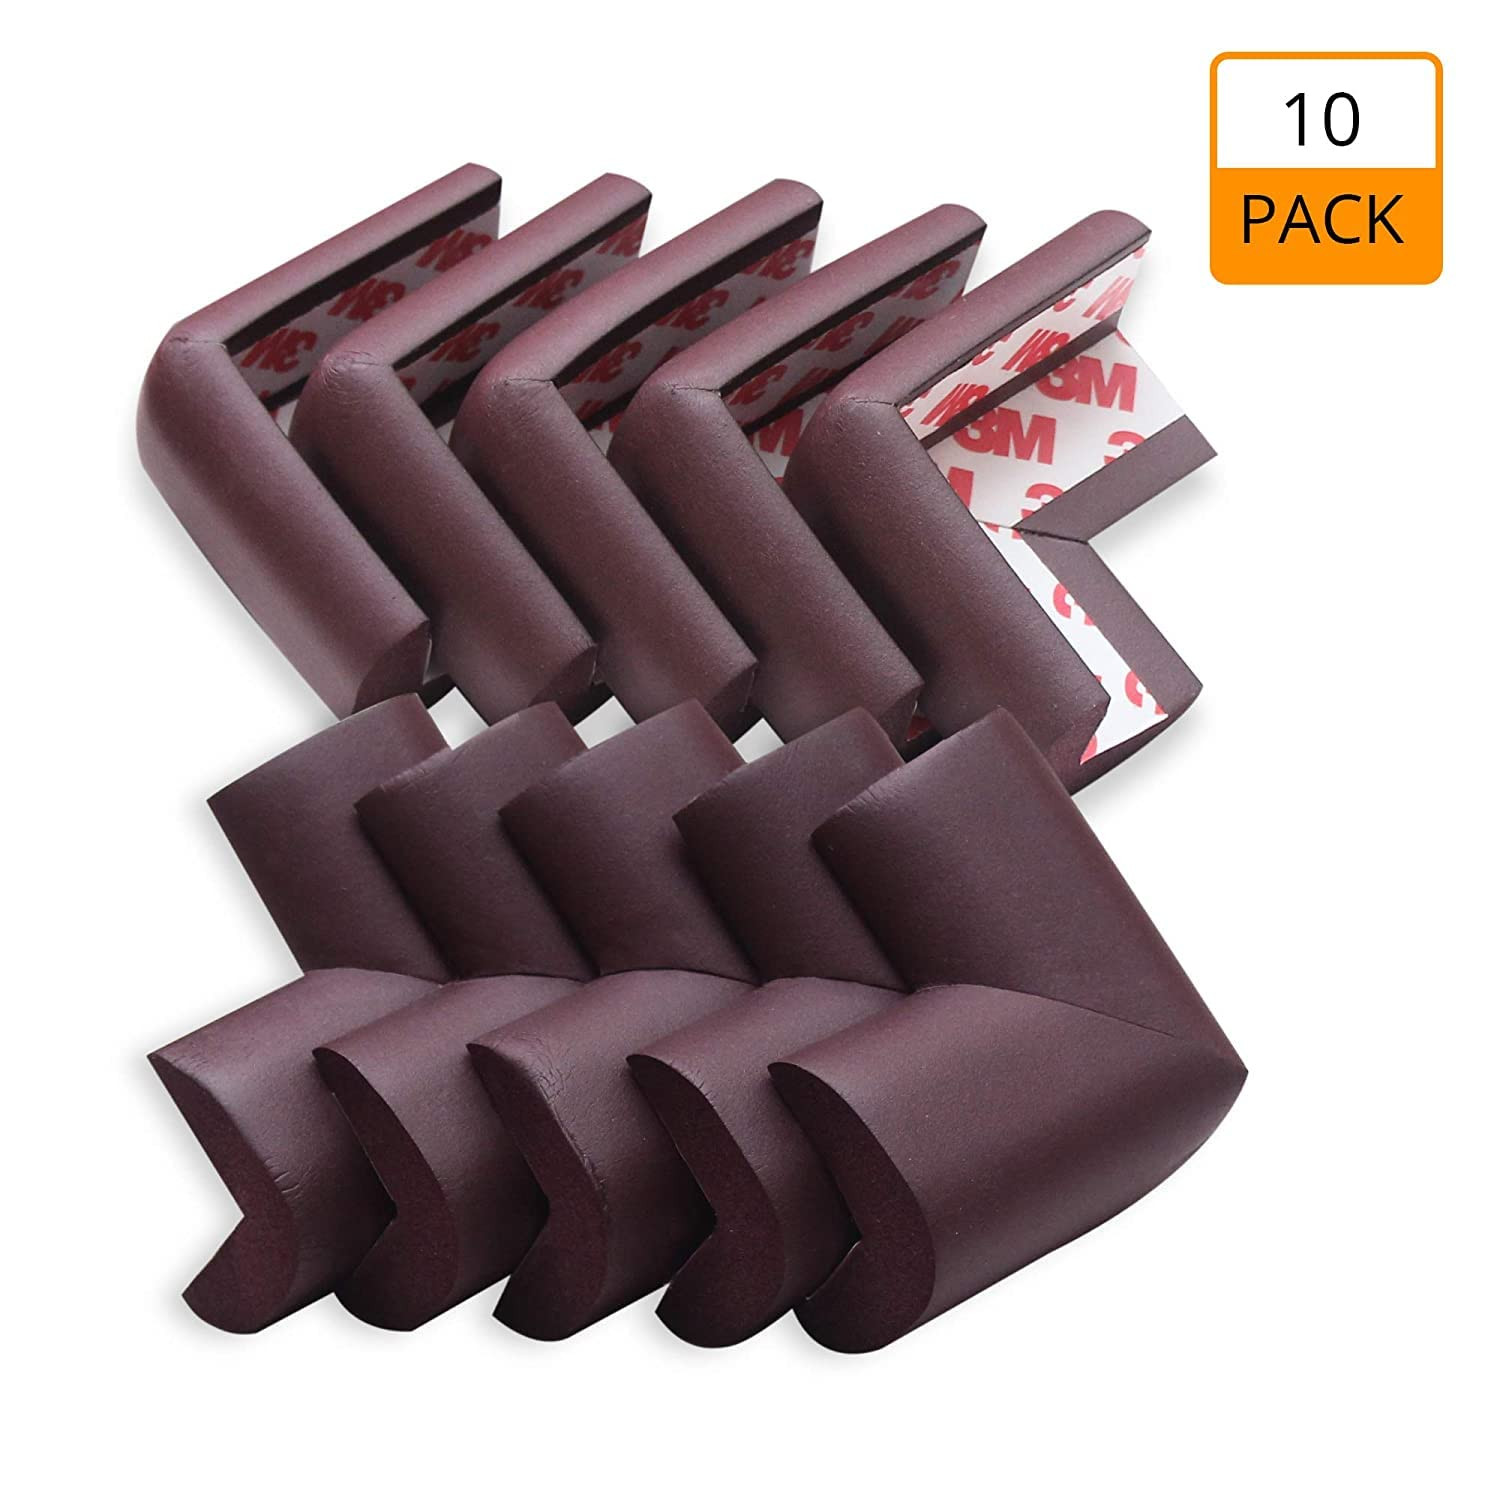 BROGBUS Baby Proofing Corner Guards I Pre-Taped Corner Protectors I Child Safety Edge Guards I 10 Pieces Brown